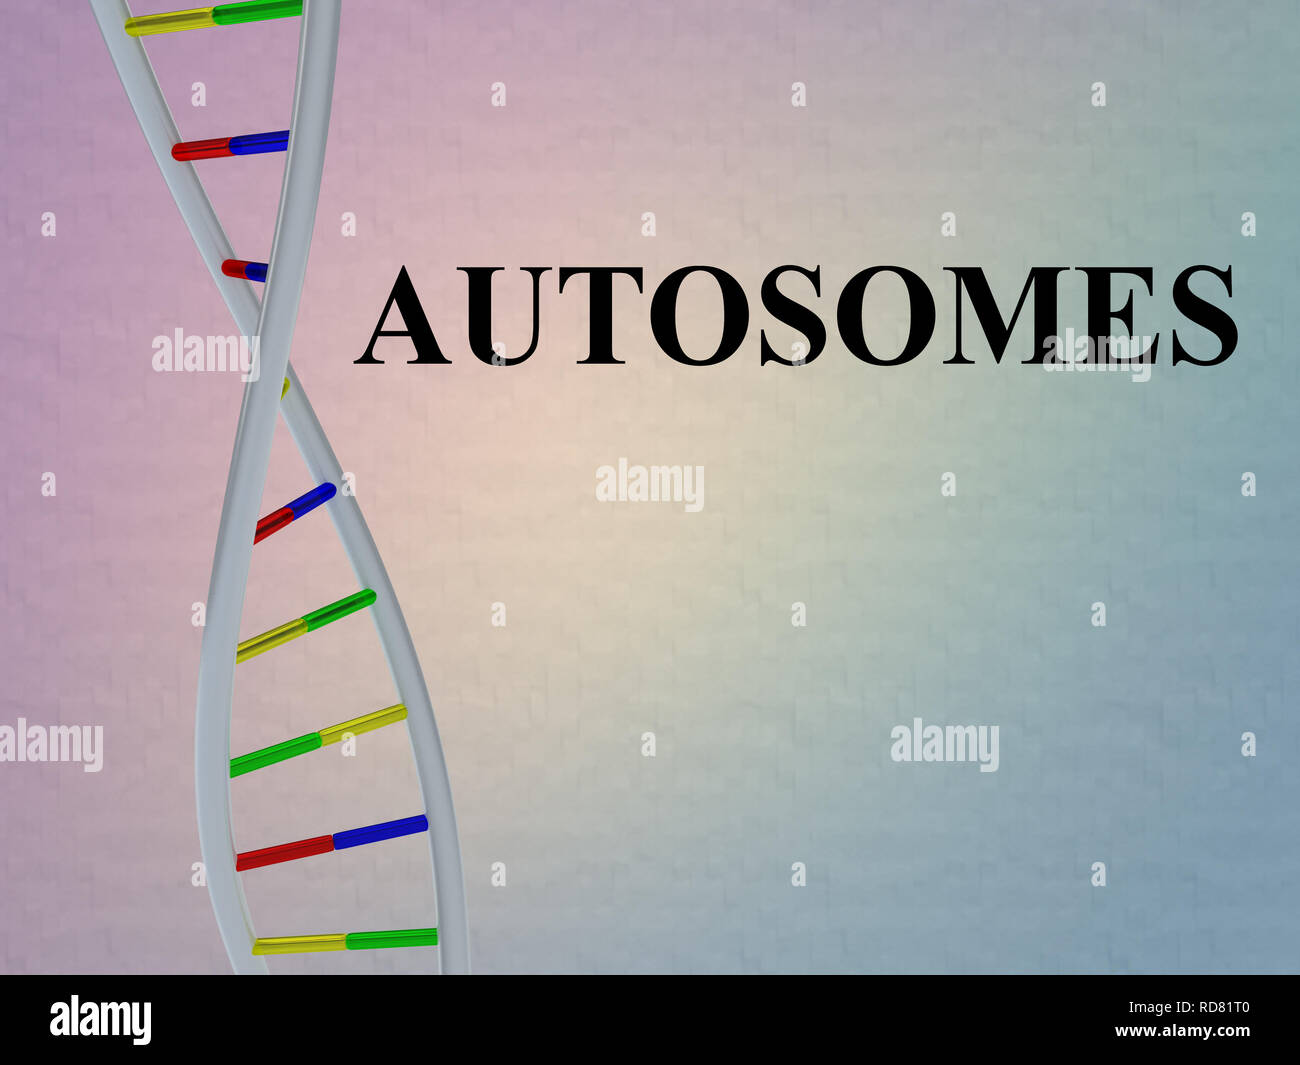 3D illustration of AUTOSOMES script with DNA double helix , isolated on colored pattern. Stock Photo